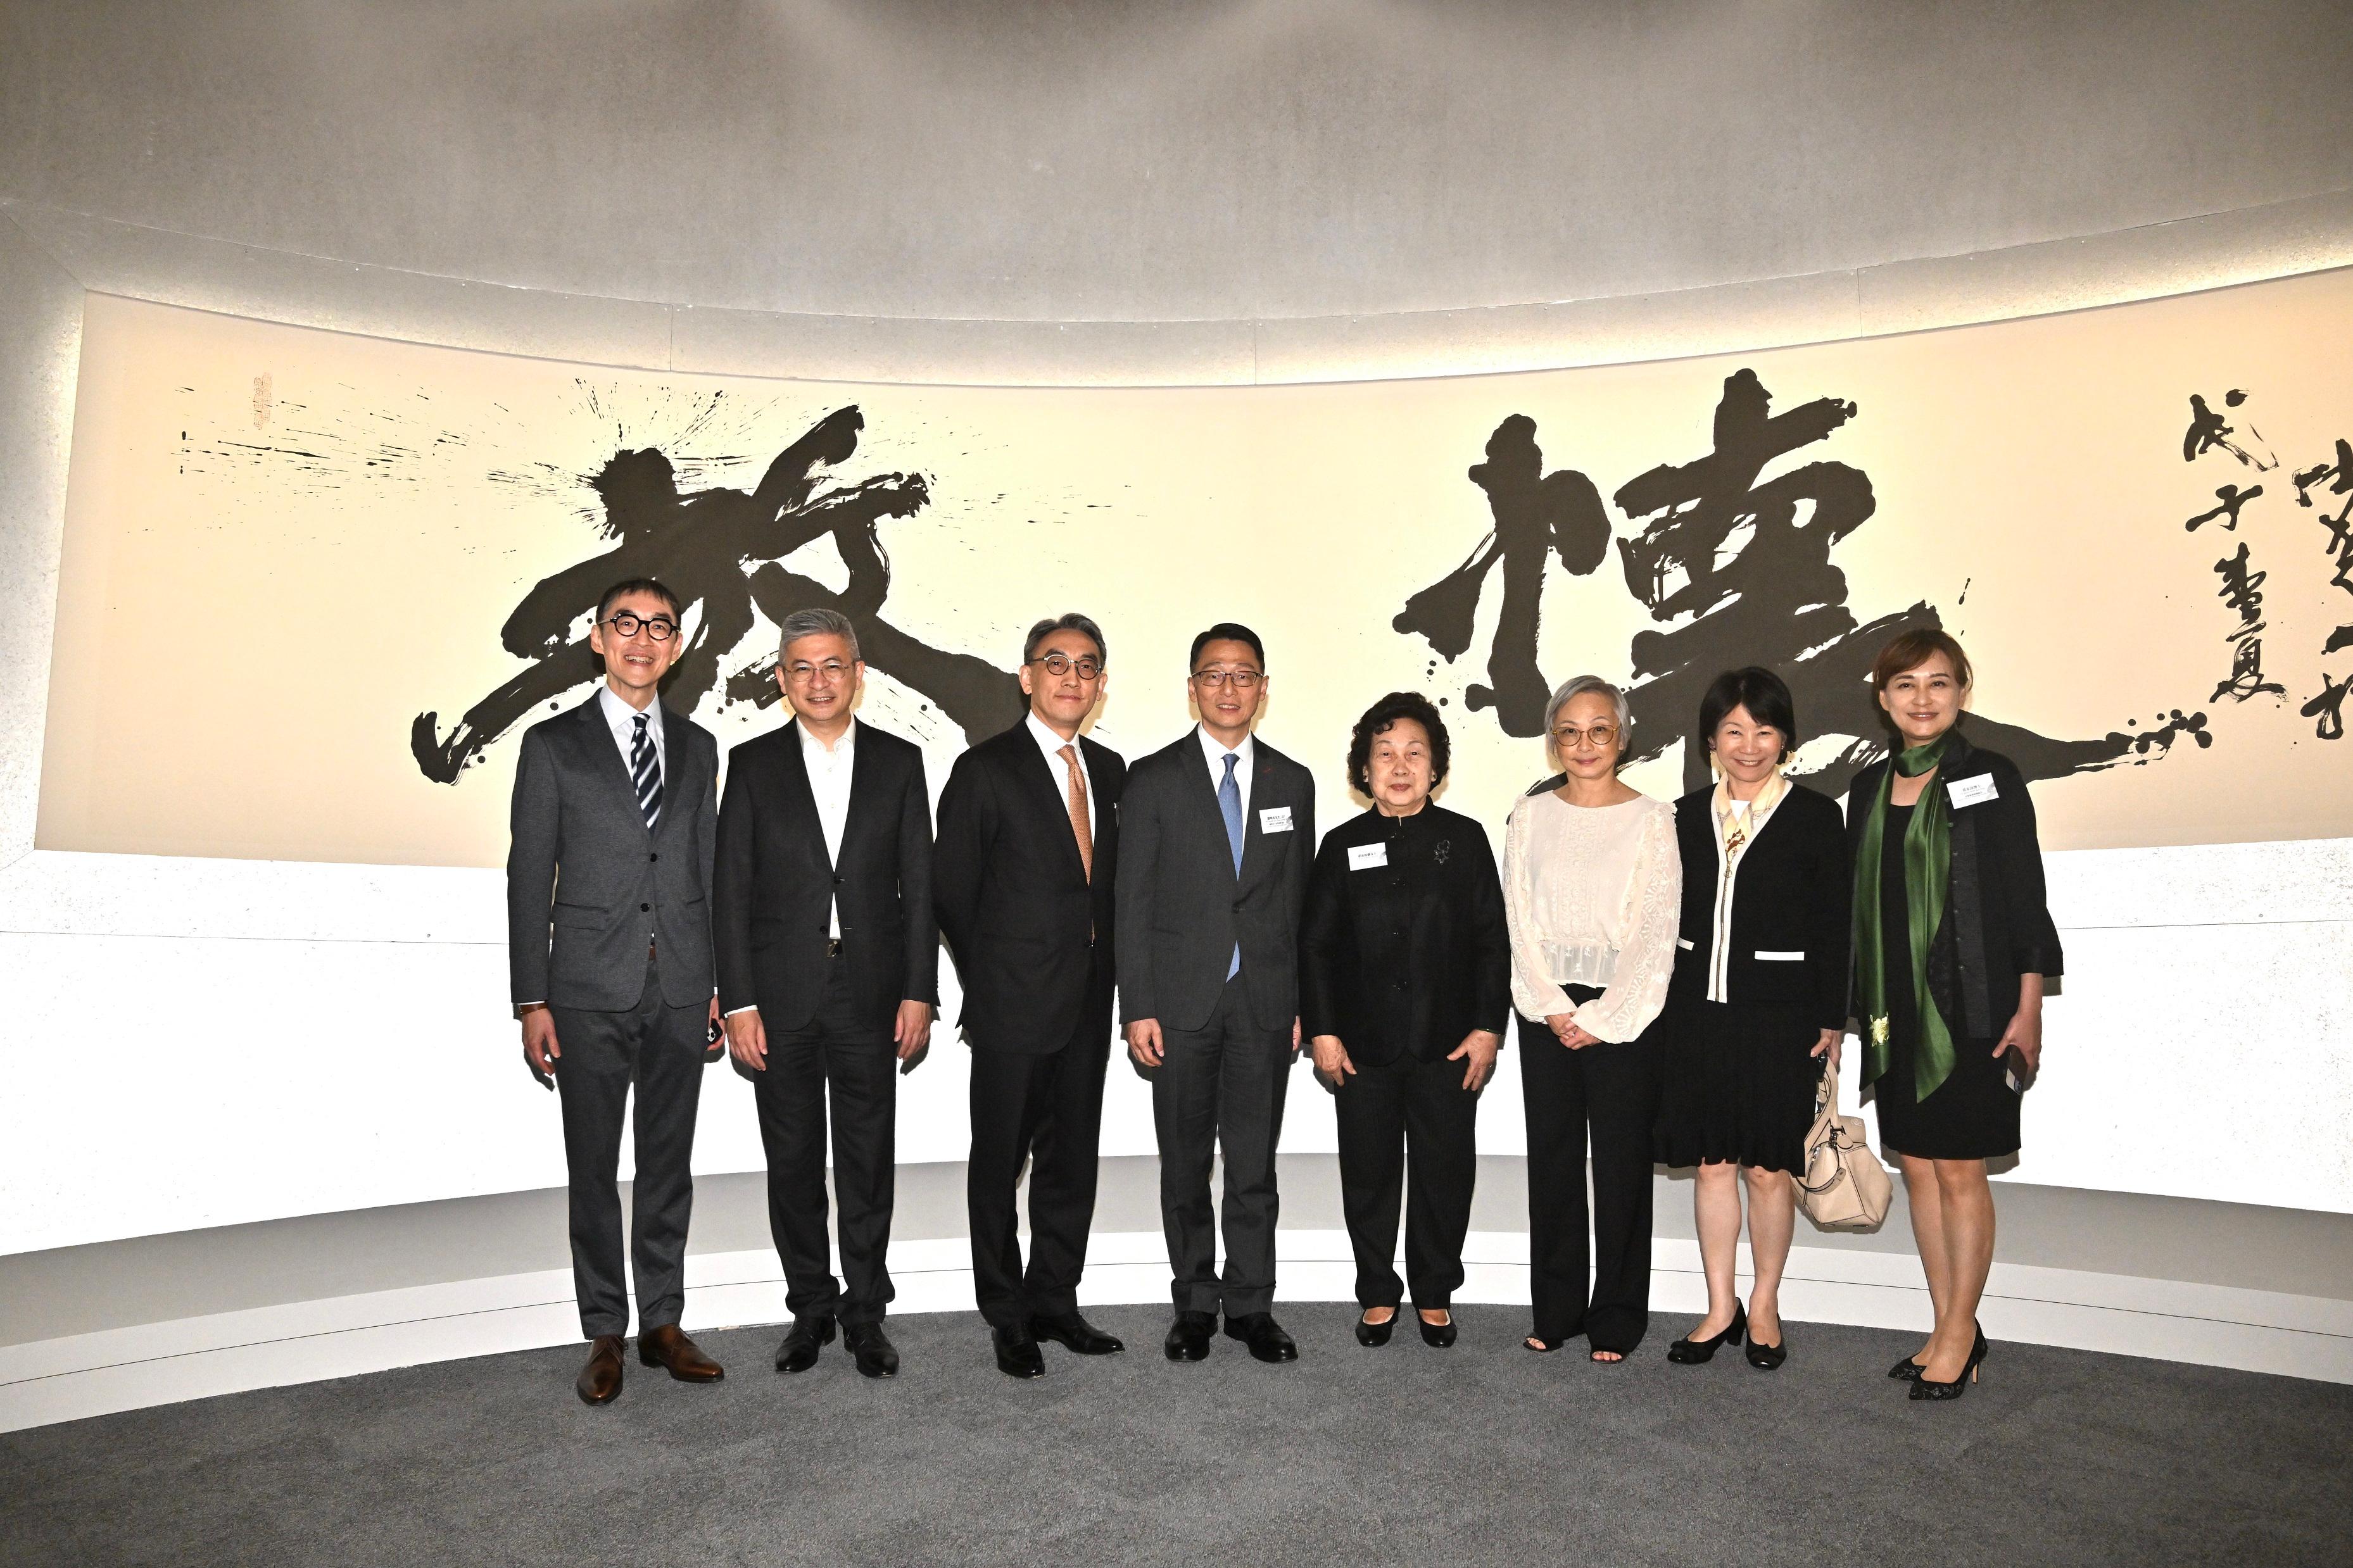 The opening ceremony of the "Boundless Universe: Calligraphy by Jat See-yeu" exhibition and donation ceremony was held today (December 7) at the Hong Kong Museum of Art (HKMoA). Photo shows (from left) the Chairman of Museum Advisory Committee, Professor Douglas So; the Under Secretary for Culture, Sports and Tourism, Mr Raistlin Lau; Jat See-yeu's son, Mr Jat Sew-tong, SC; the Director of Leisure and Cultural Services, Mr Vincent Liu; Jat's wife, Mrs Jat Hwang Sun-lun; Jat's daughter, Ms Jat Mo-yue; the Commissioner for Tourism, Ms Vivian Sum; and the Museum Director of the HKMoA, Dr Maria Mok, in front of an artwork more than 6 metres wide named "Calligraphy in running script" by Jat. 